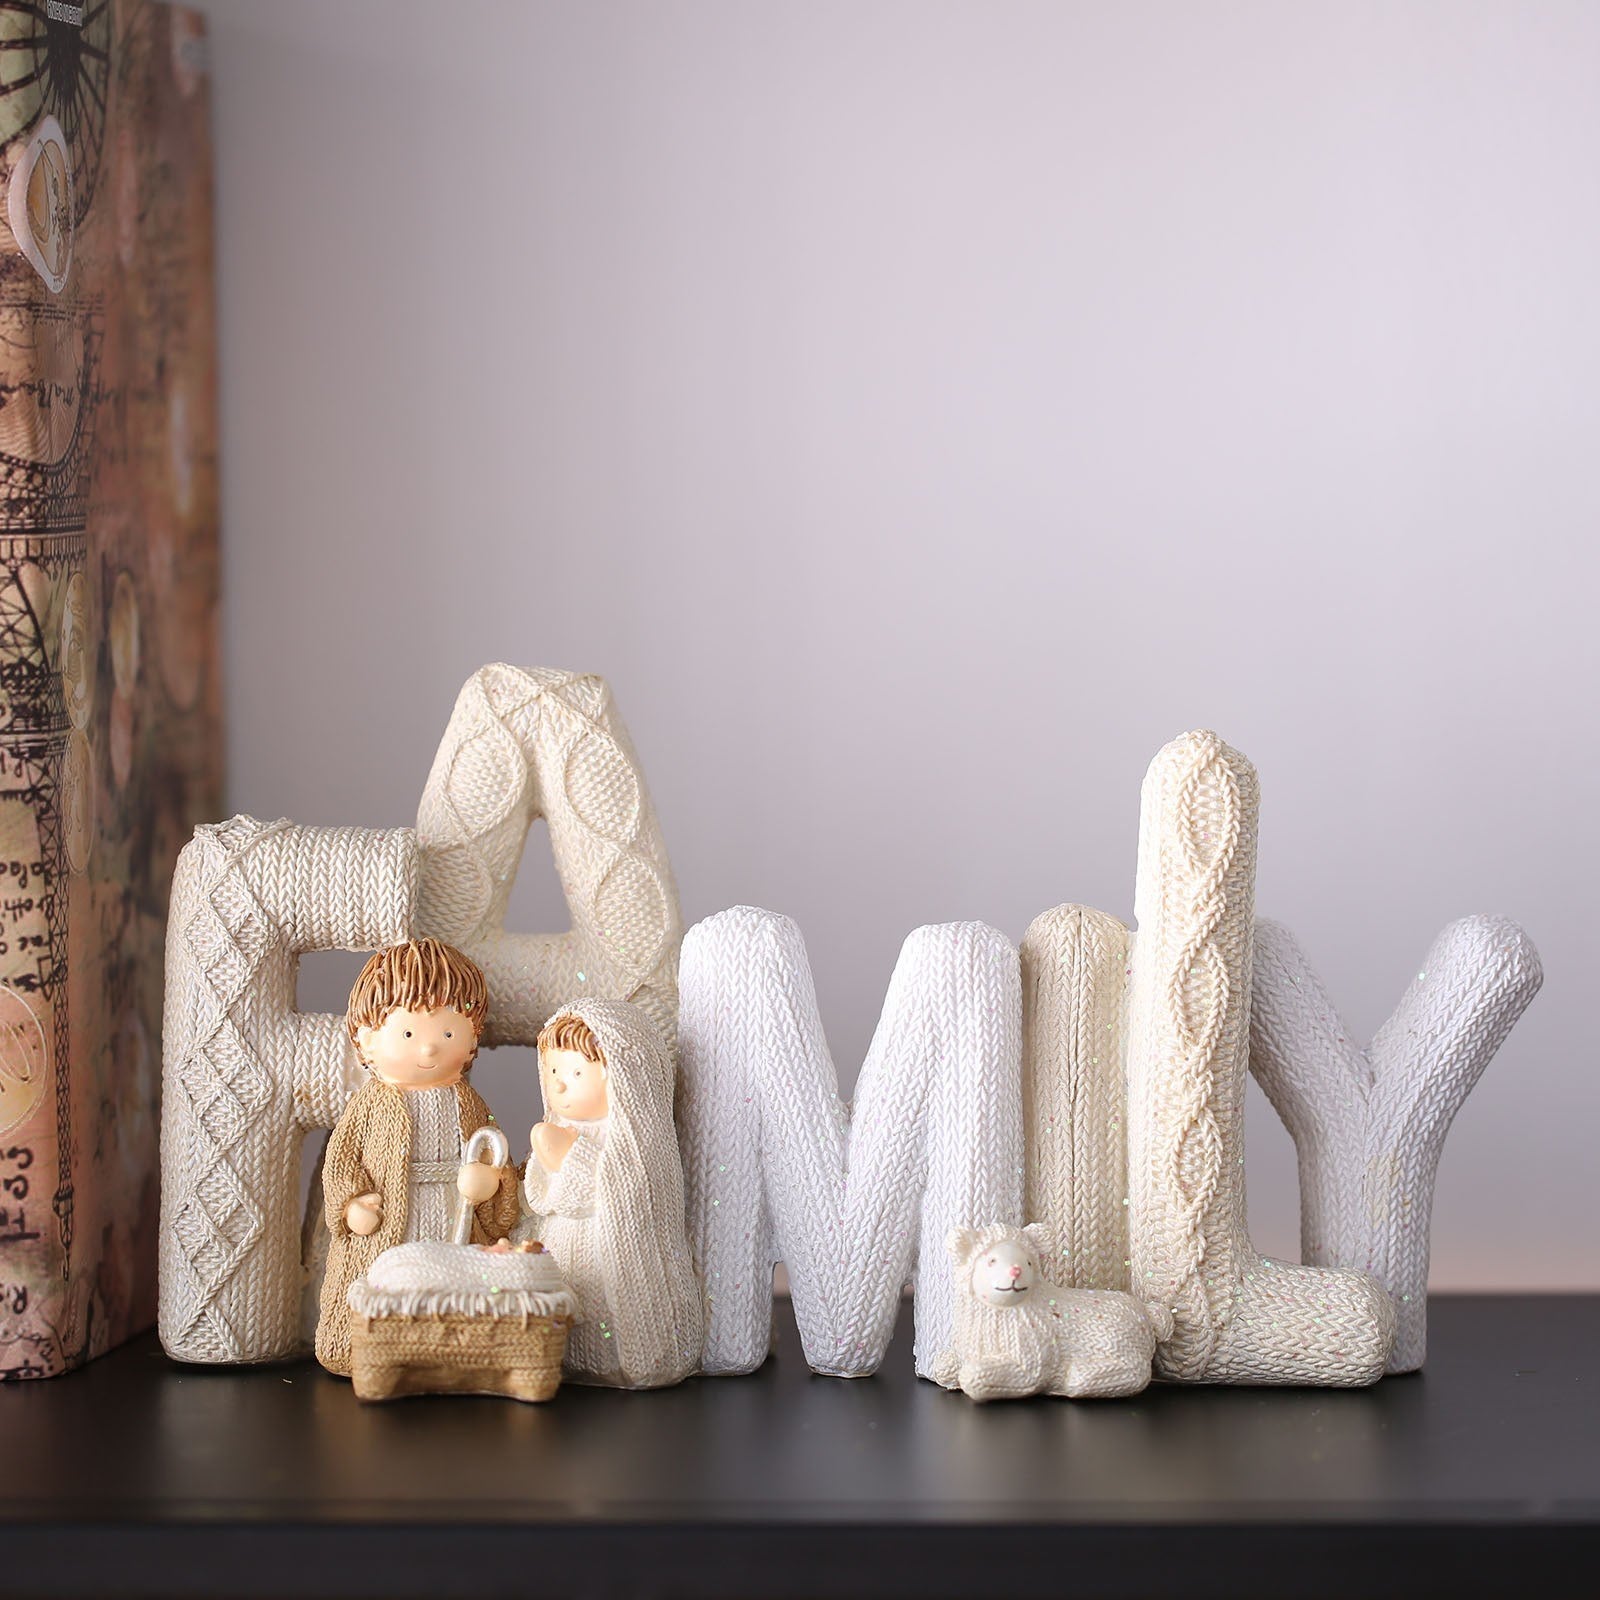 It's time to get sentimental with family ornament and gift in christmas